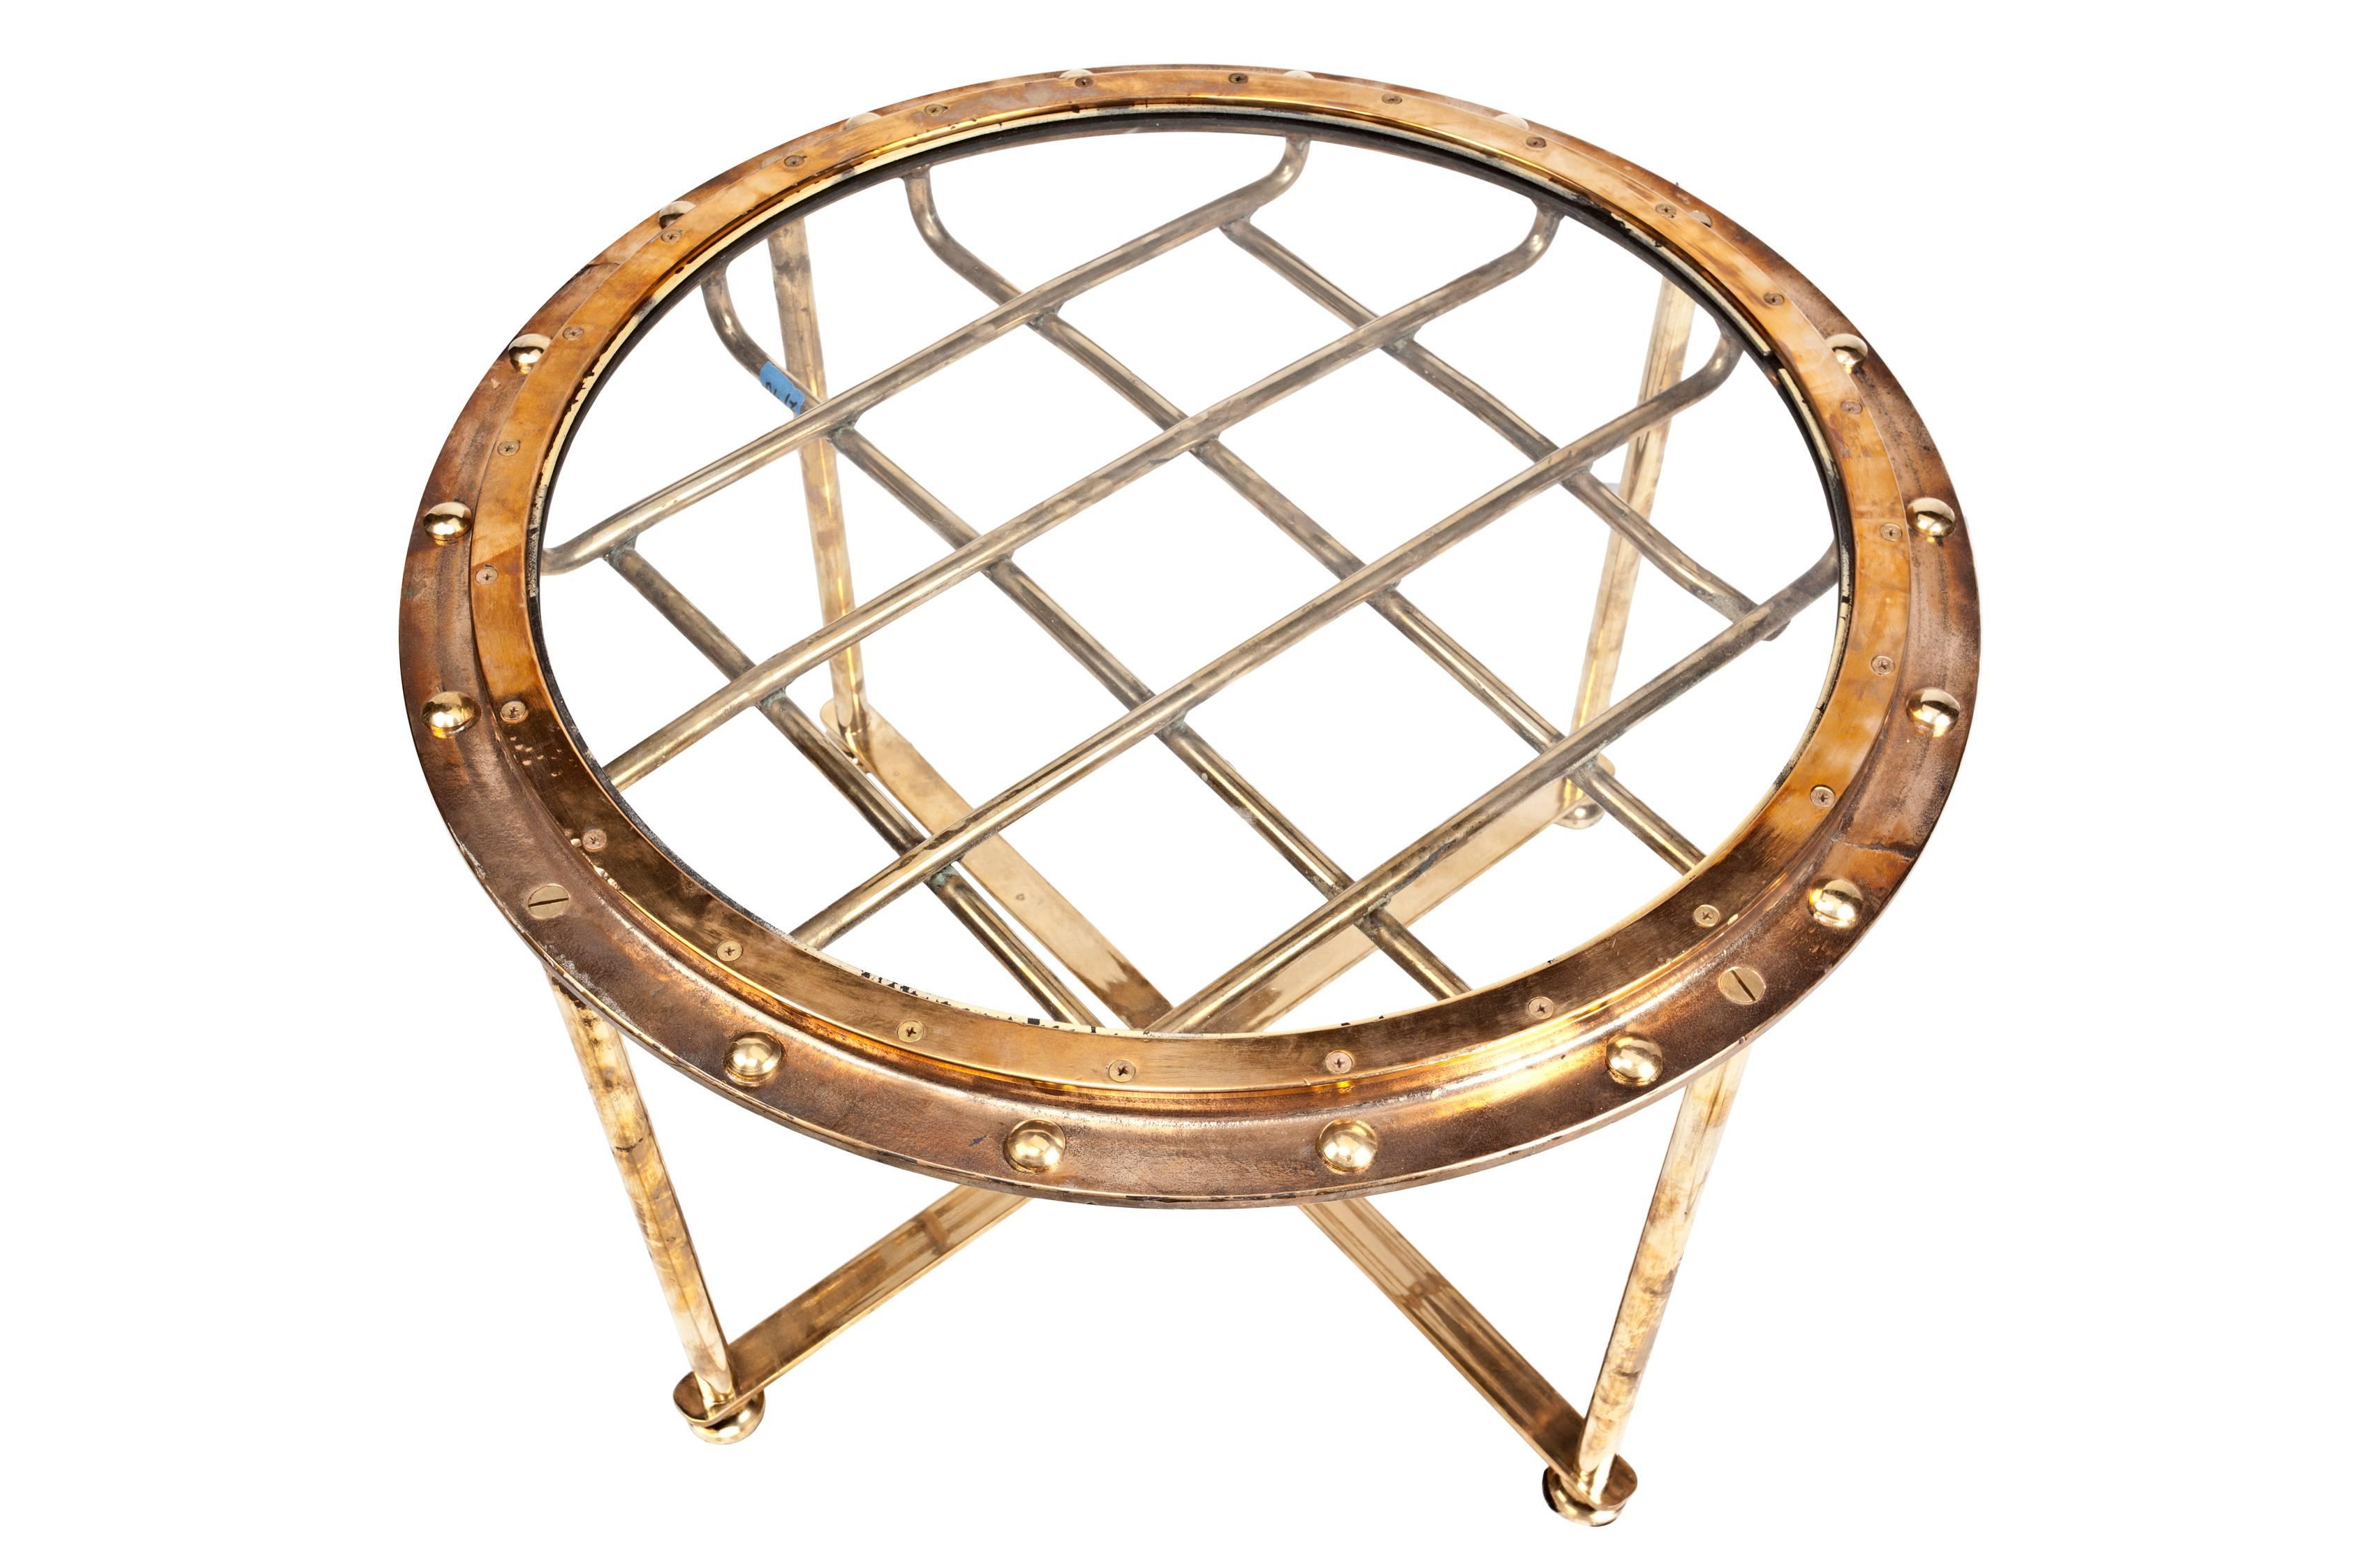 This is a rare find these brass porthole ship windows with the exterior protective brass grid. I had them converted to tables using my own custom design. These are designed to come apart for easier transport and have had the brass rivets put back in